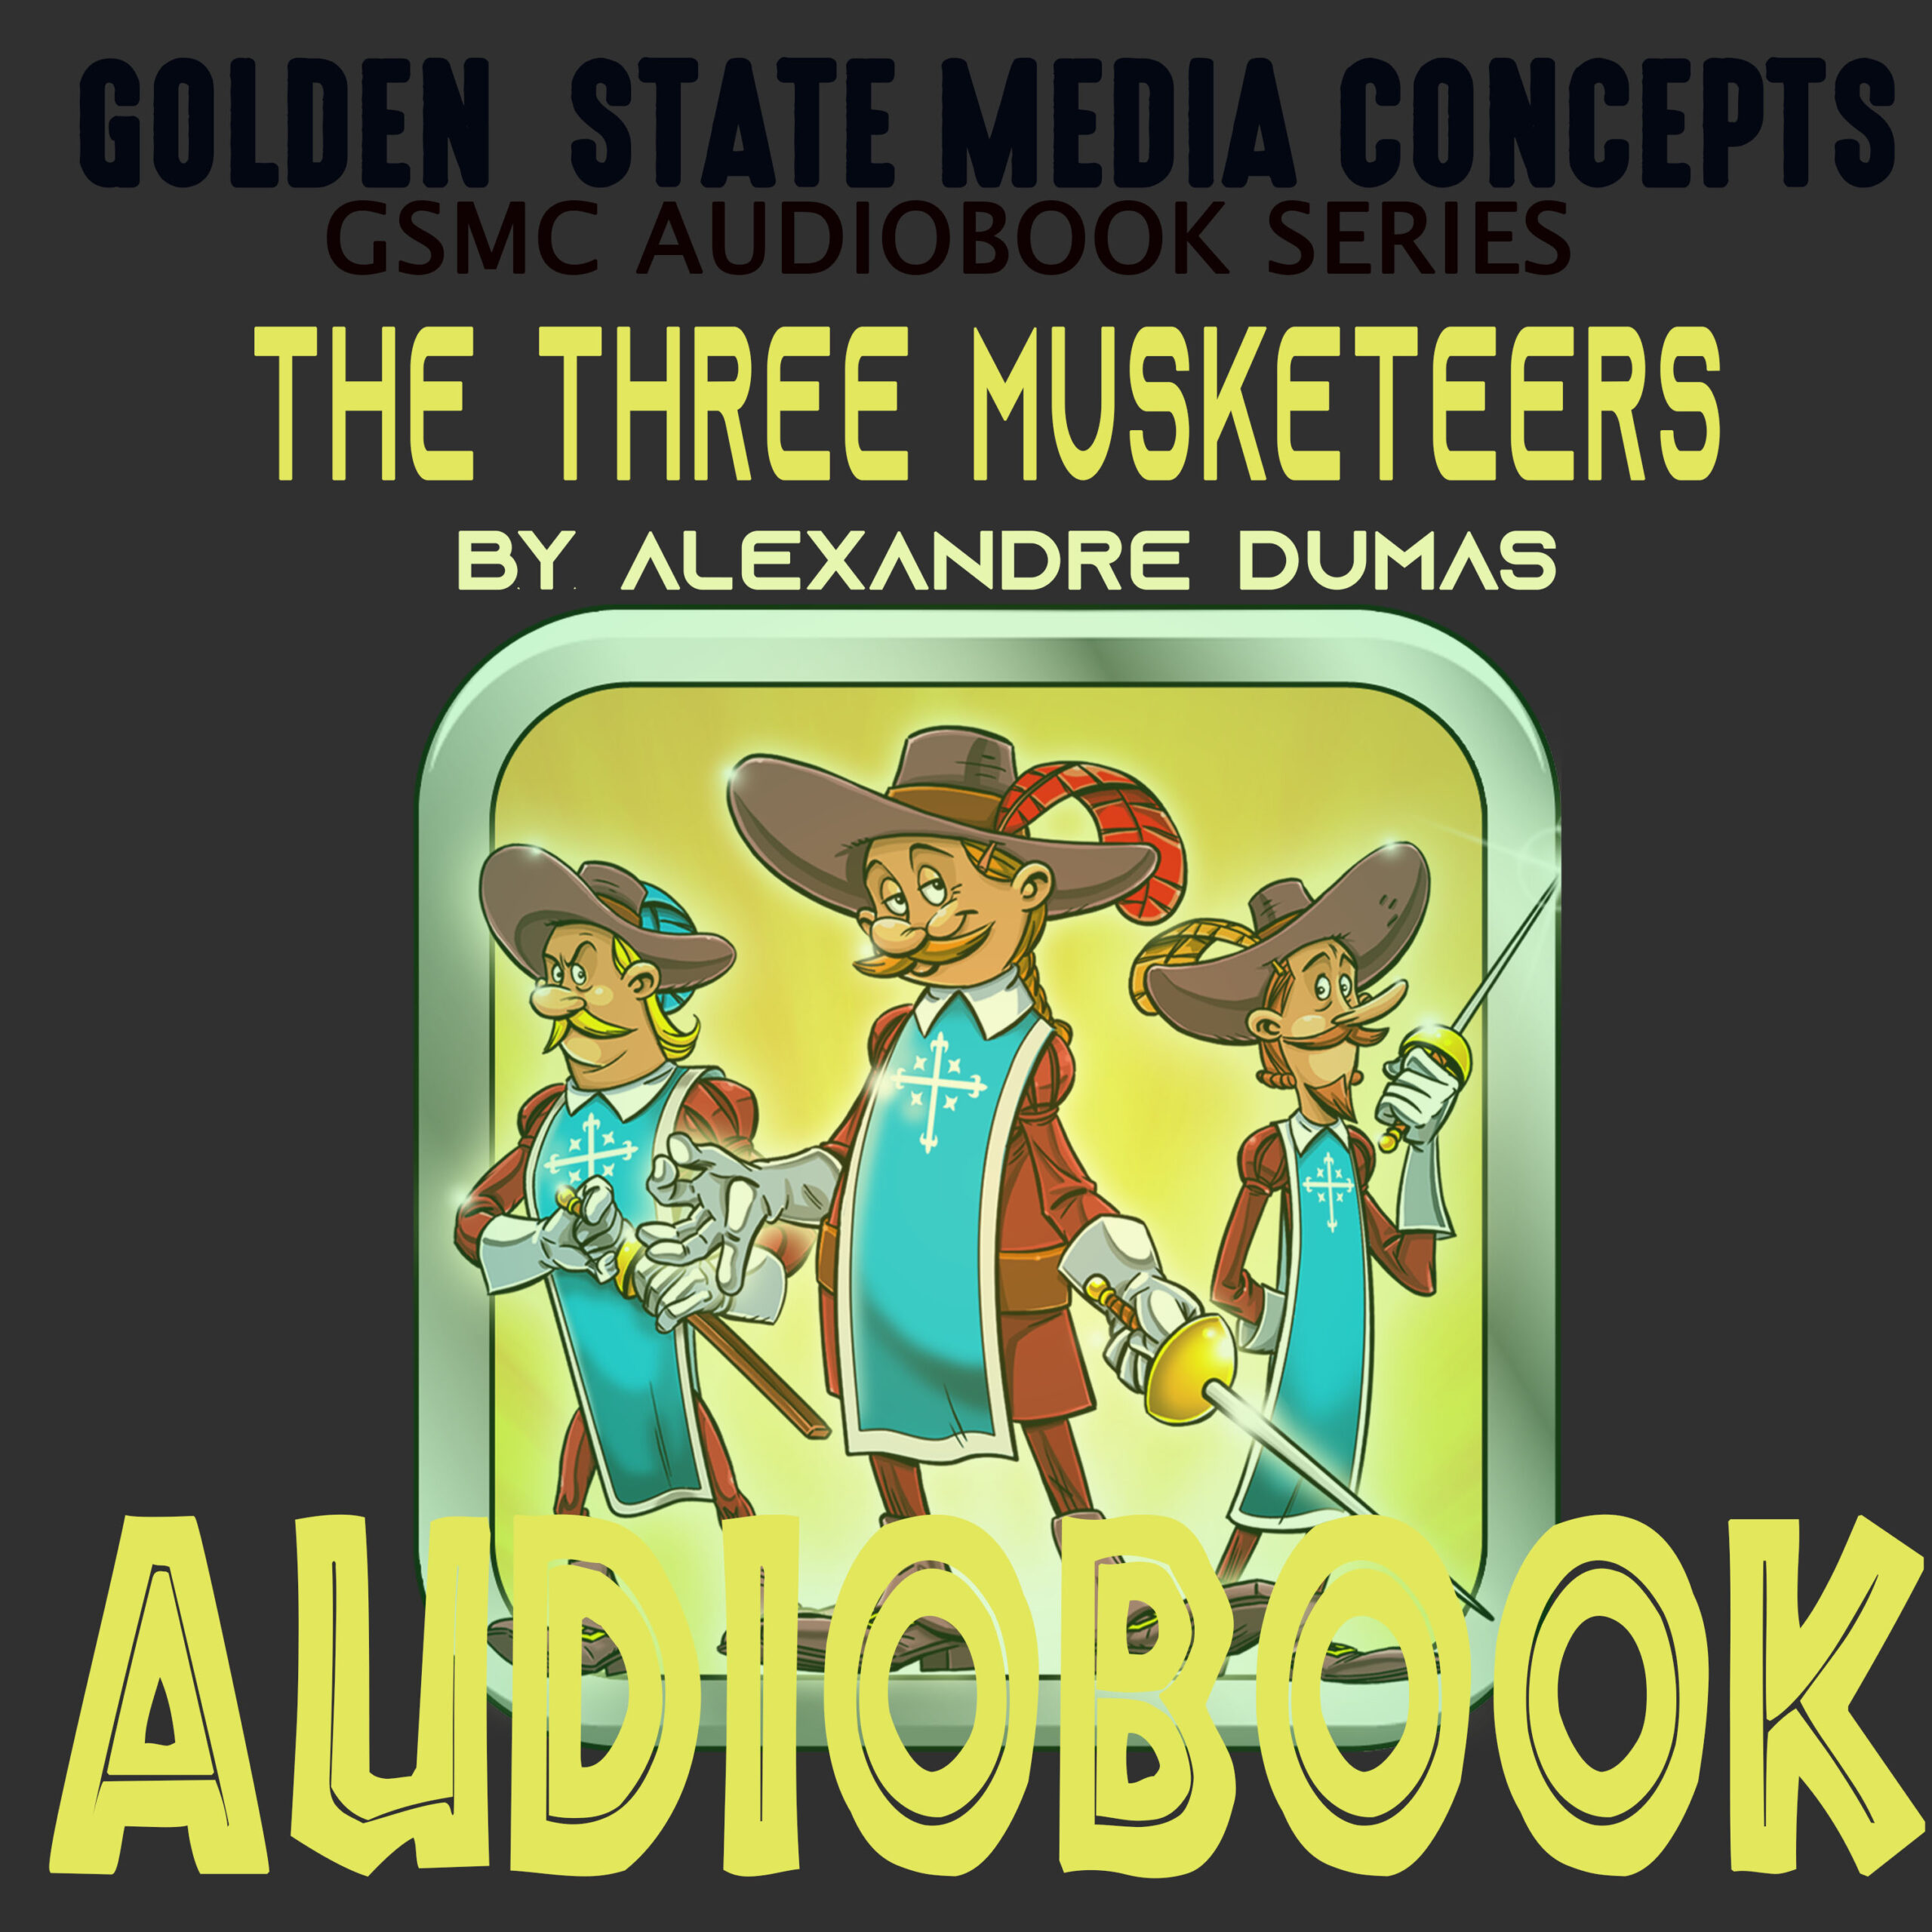 GSMC Audiobook Series: The Three Musketeers by Alexandre Dumas